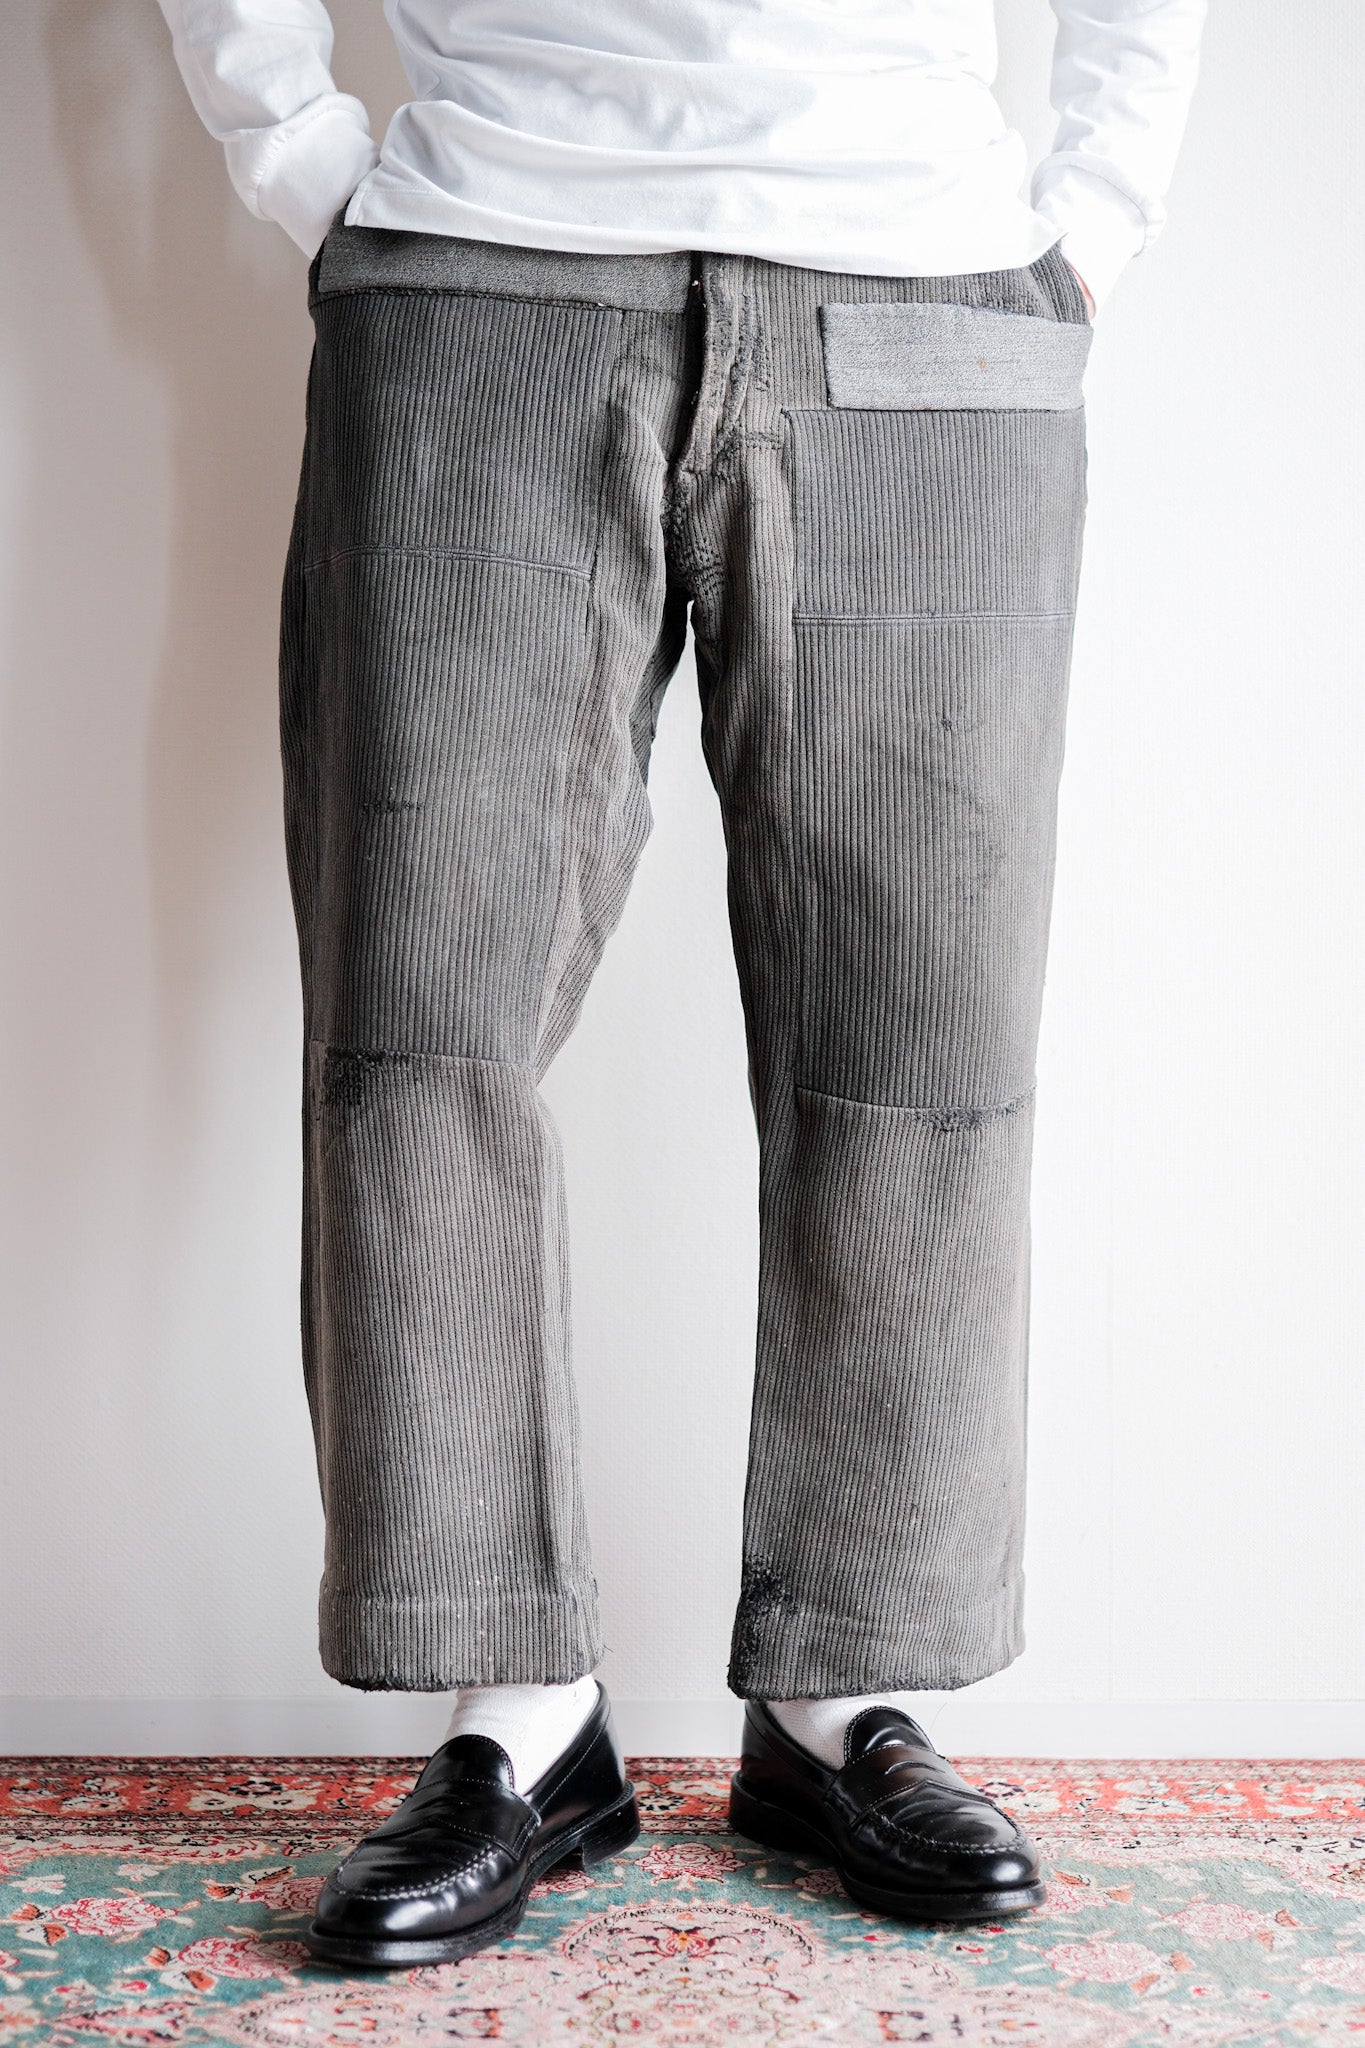 【~40's】French Vintage Gray Cotton Pique Work Pants "Patchwork"